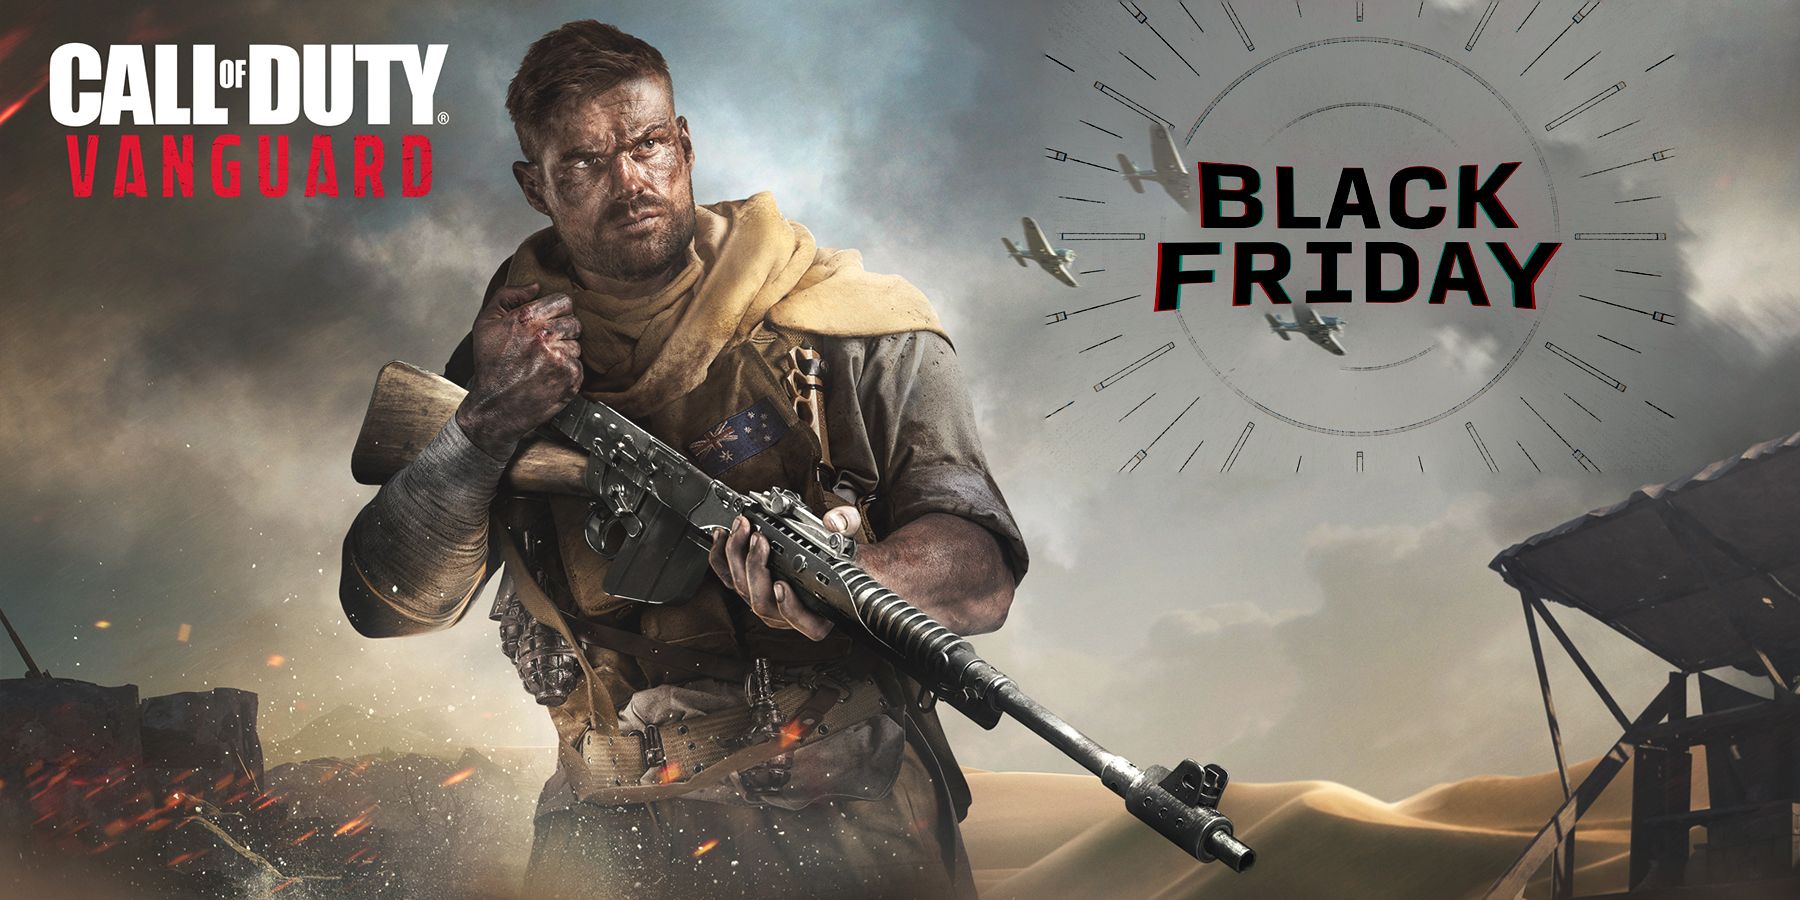 Get Call of Duty Vanguard Cheap for Black Friday